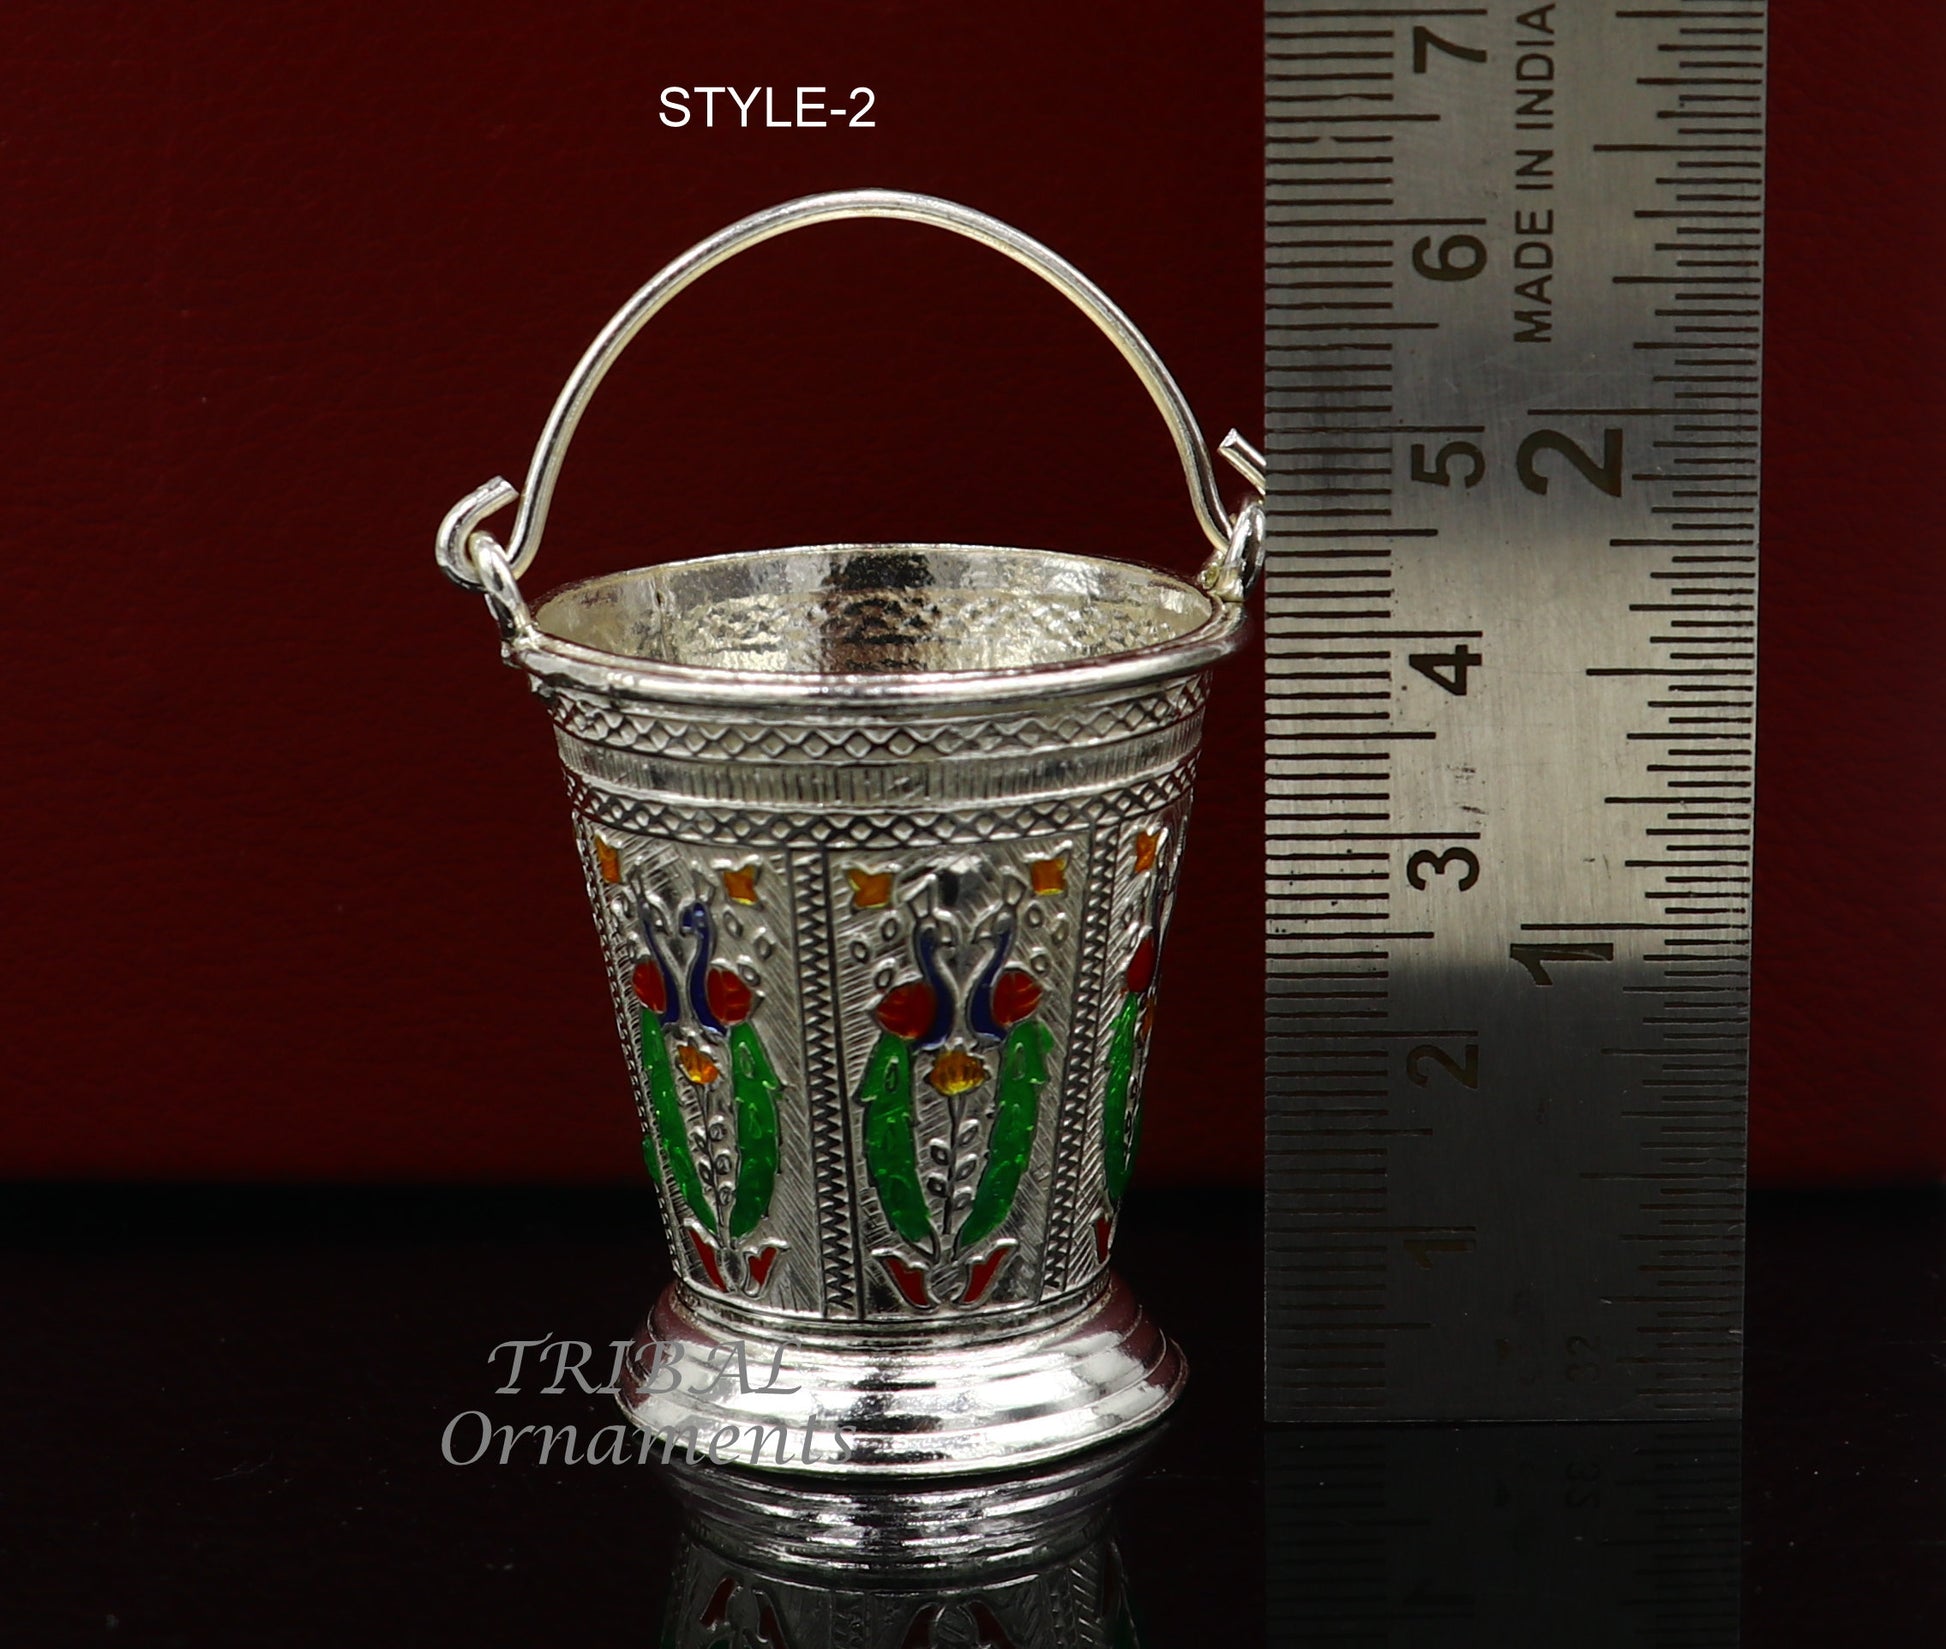 925 sterling silver handmade fabulous vintage style bucket toy for puja or worshipping, Diwali puja article utensils su975 - TRIBAL ORNAMENTS